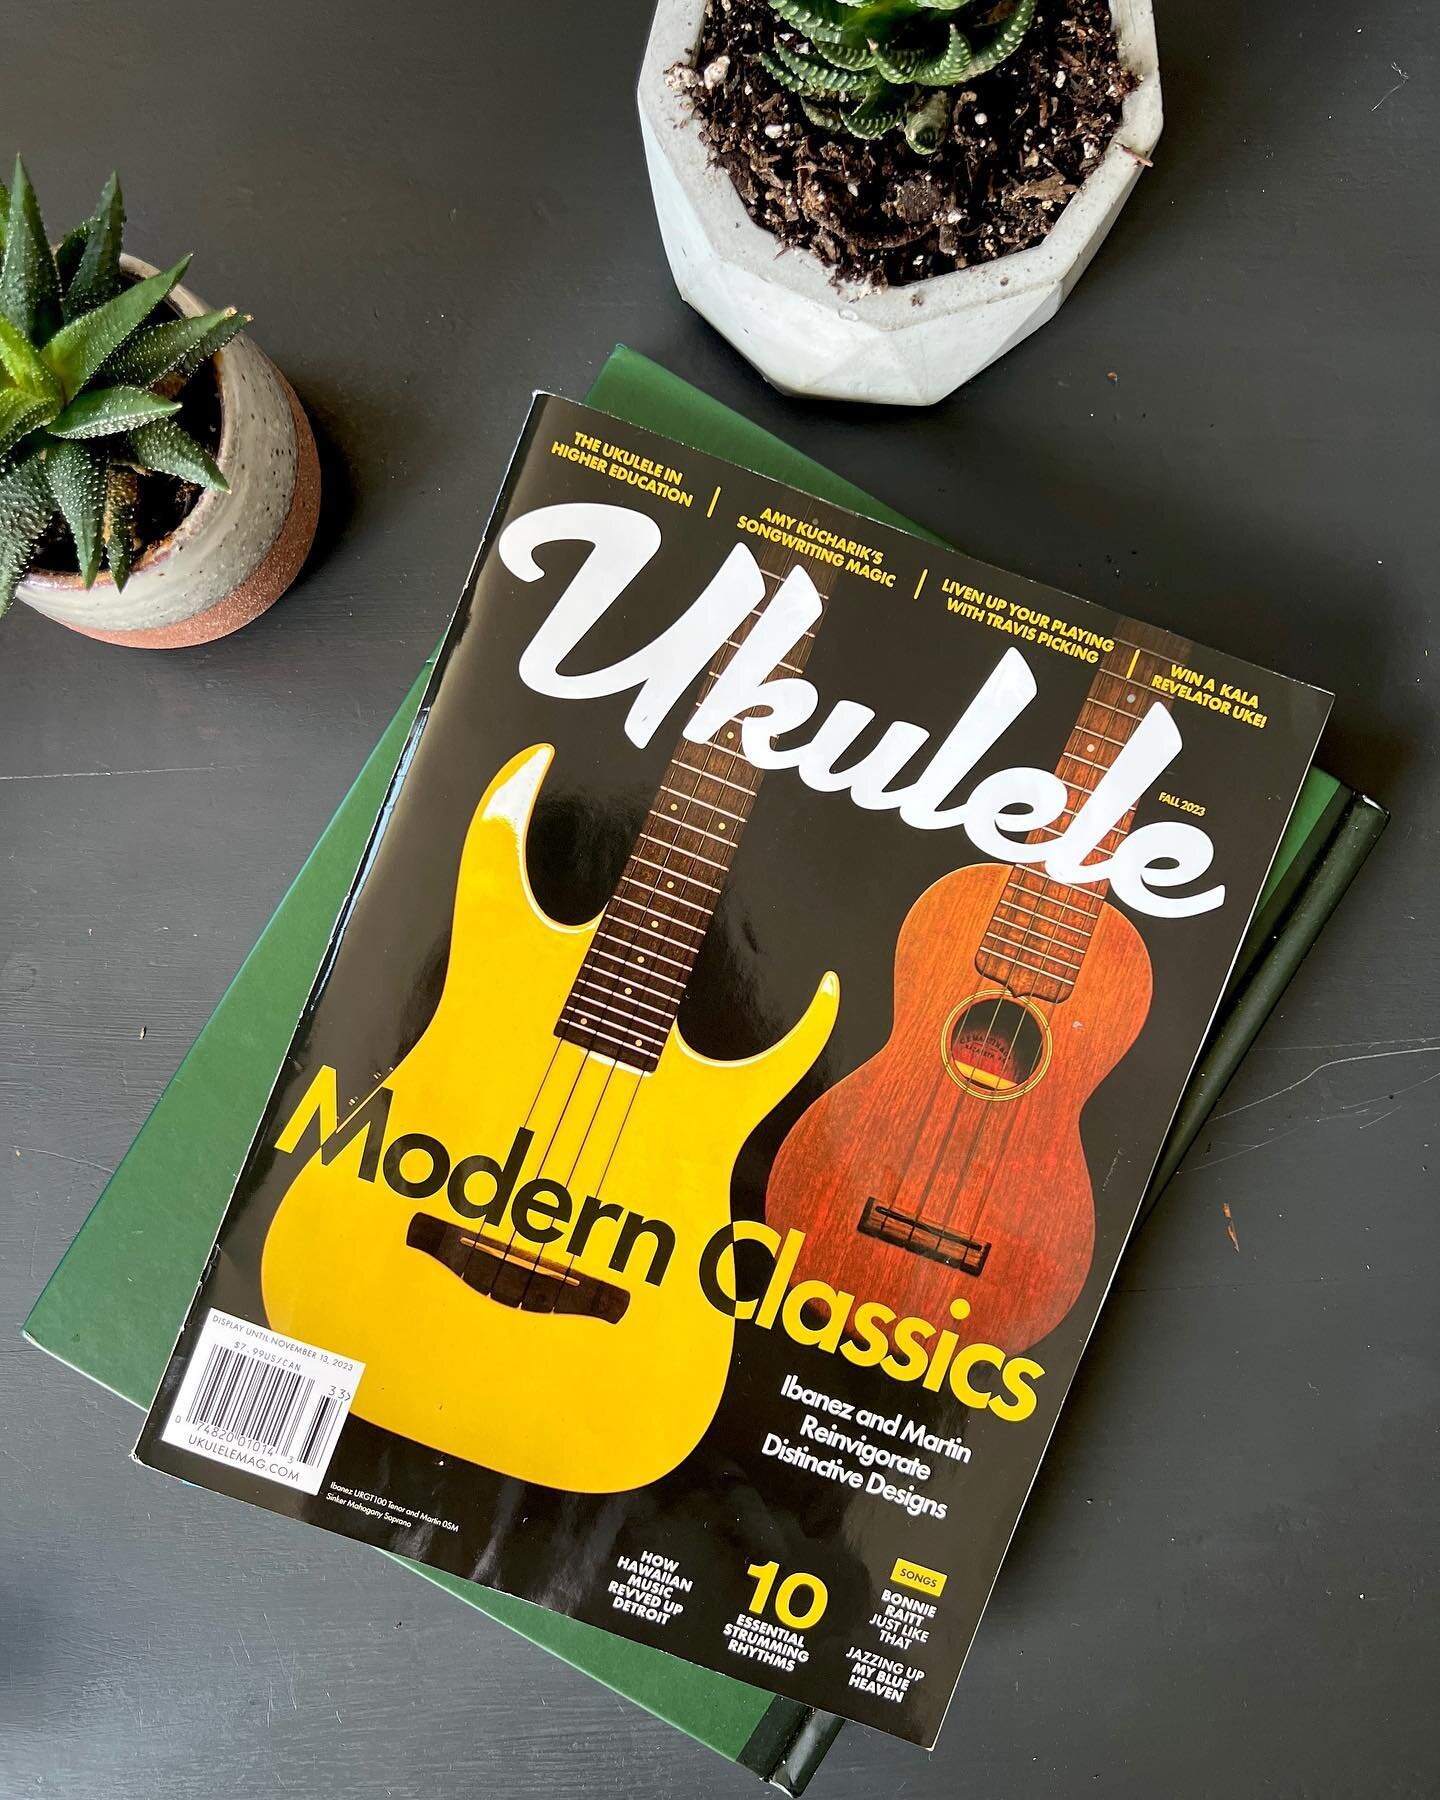 MOM! Can&rsquo;t believe it &ndash; I&rsquo;m featured in @ukulelemagazine! Huge shoutout to Blair for the awesome write-up about my latest album, my incredible pals @koalohaukulele, the genius production skills of @palmertrees_, my fav strings @ukel